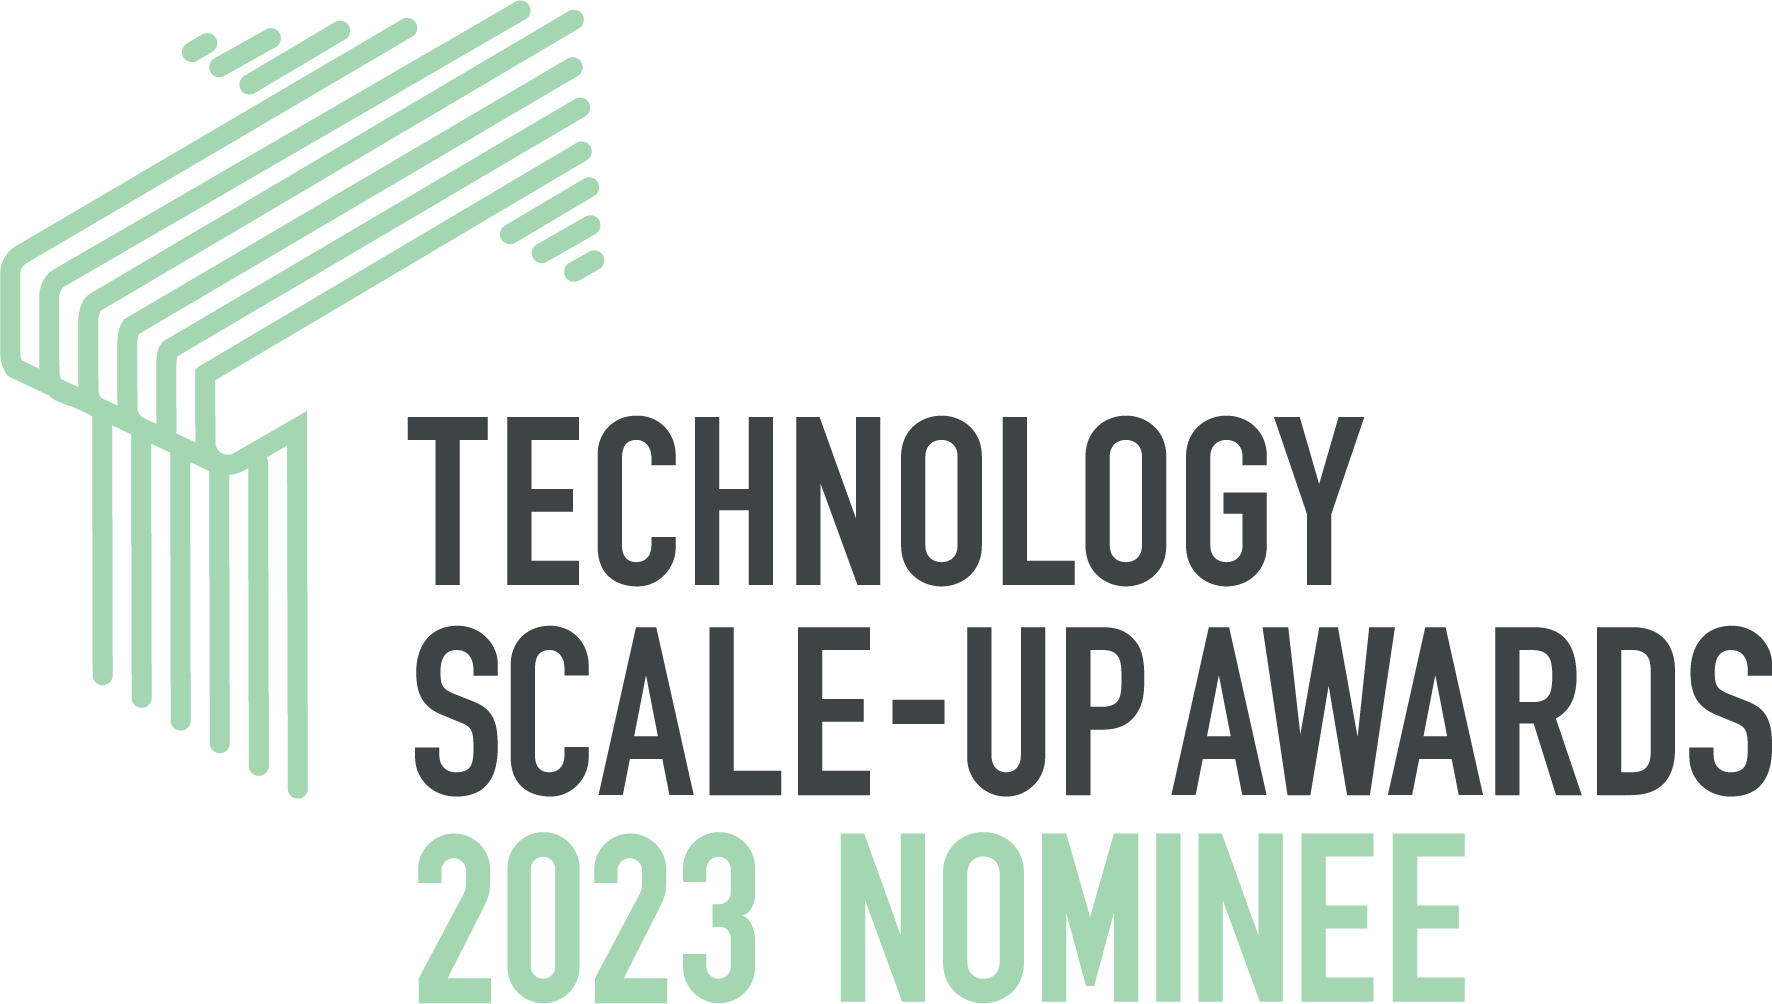 Tech Scale-Up Awards Nominee 2023